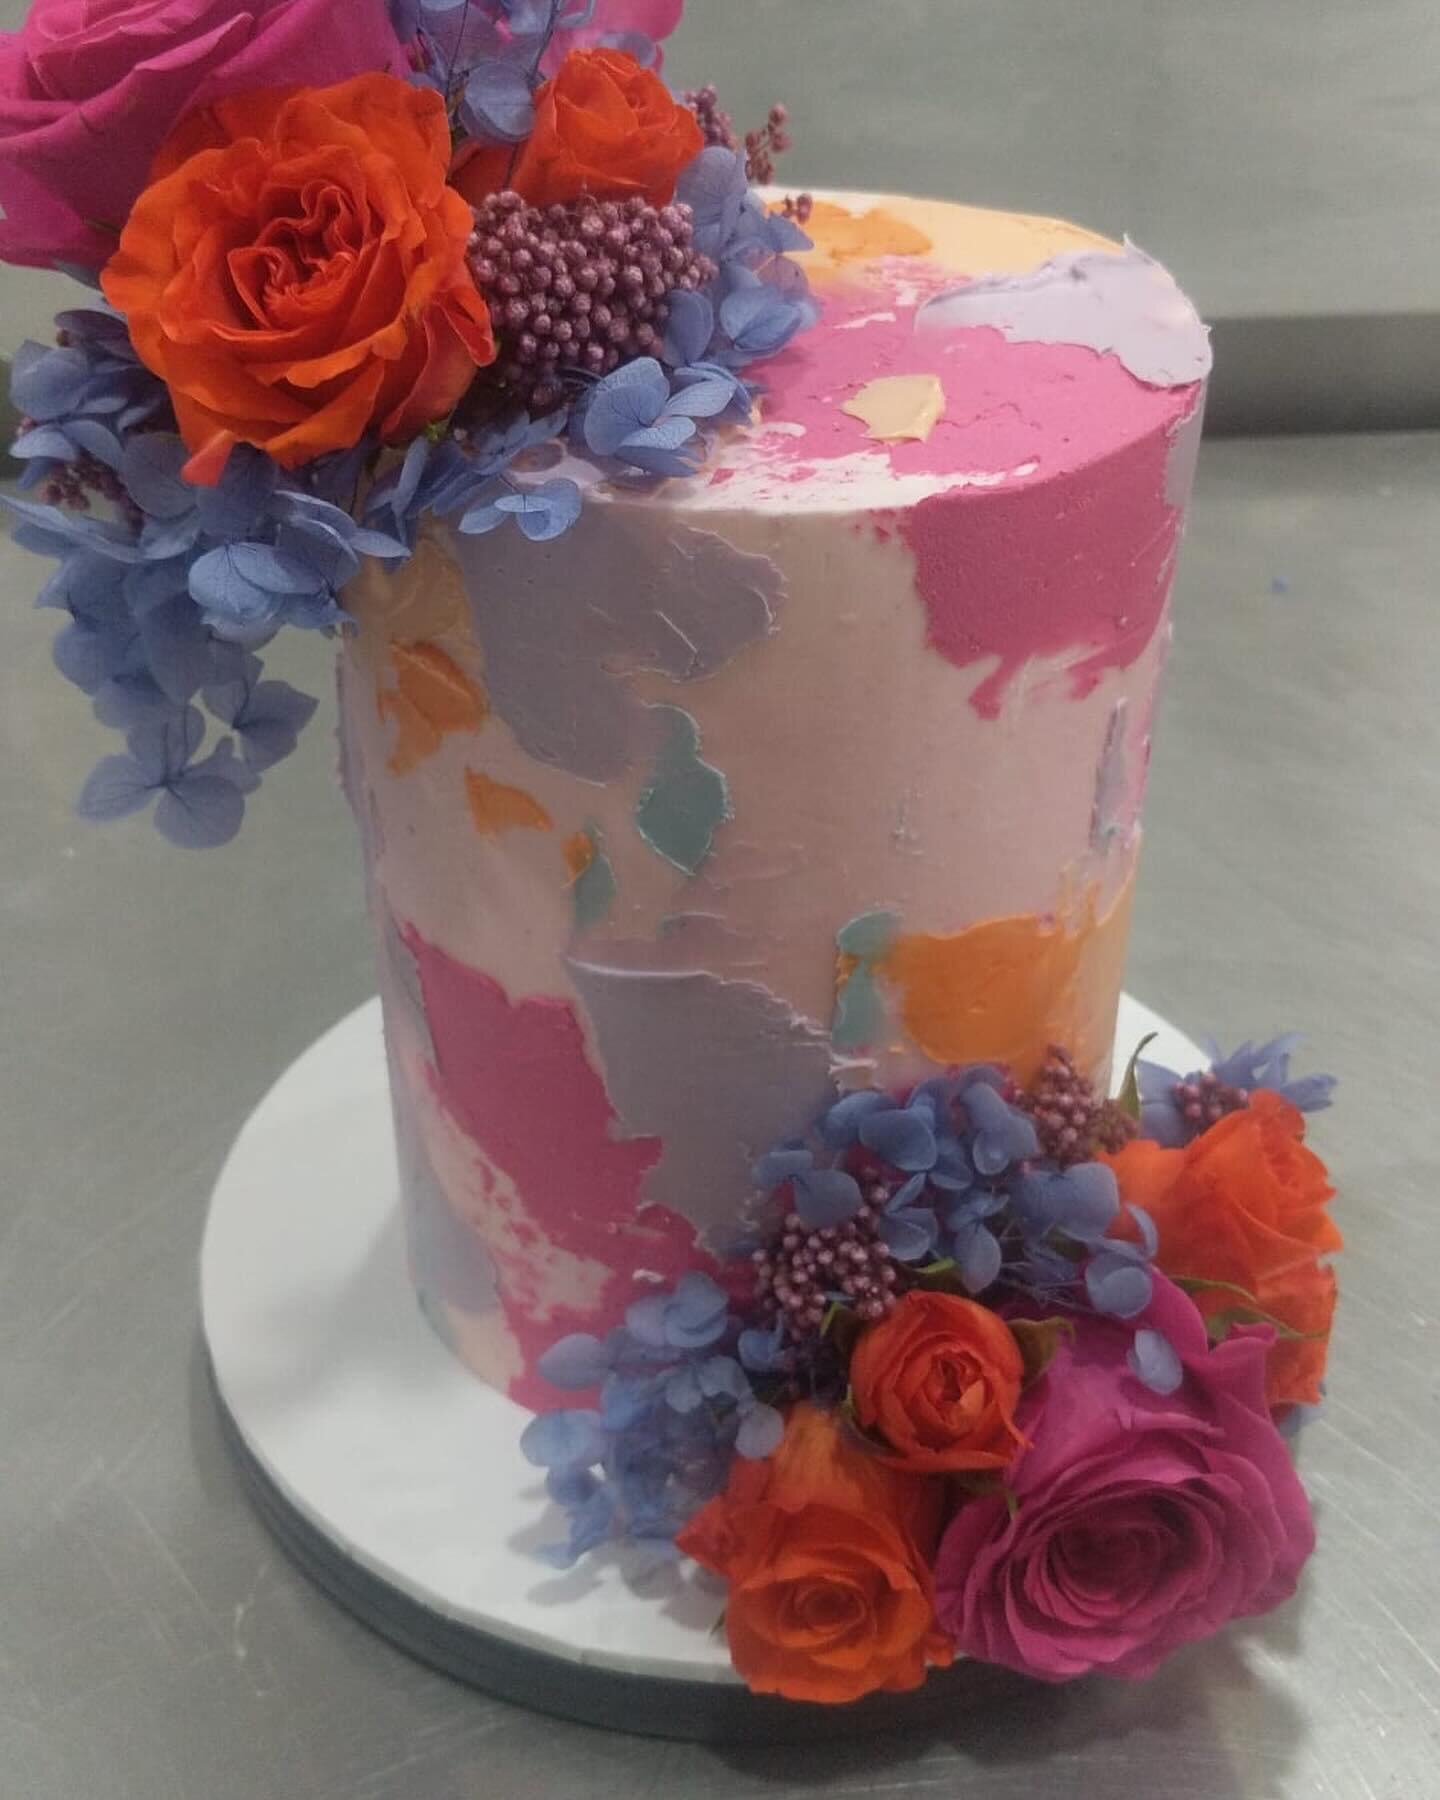 Sunset cake or vintage piped, which would you choose?